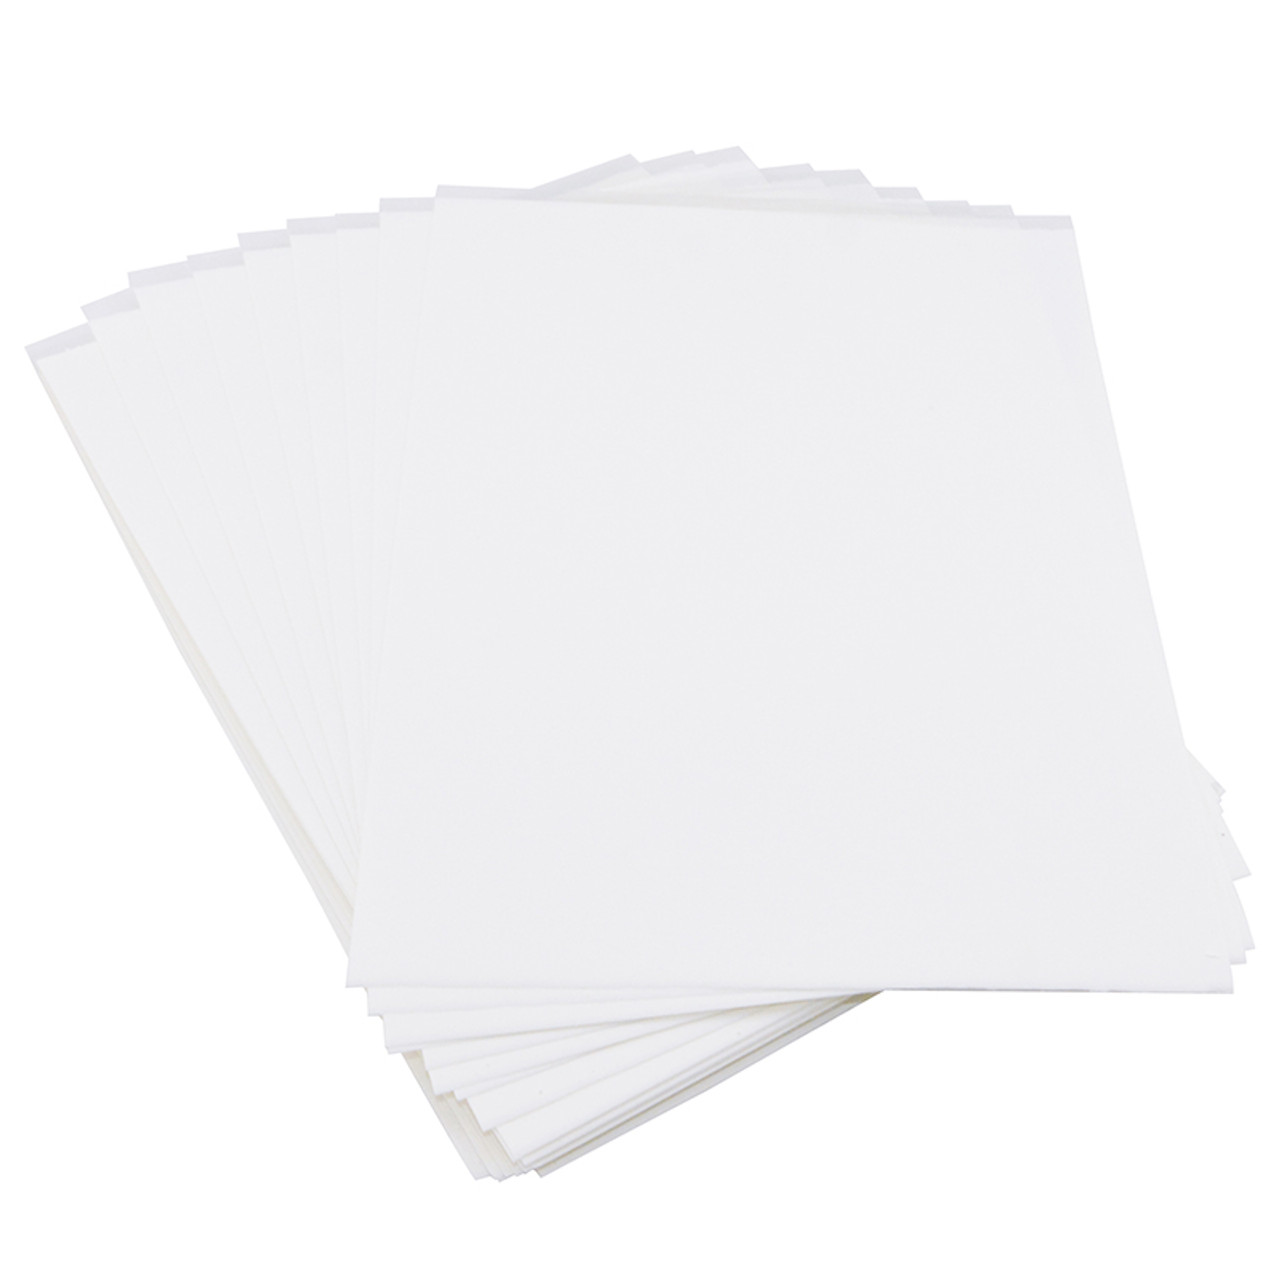 White Sugar Sheets Edible Decorating Paper, 3-Count